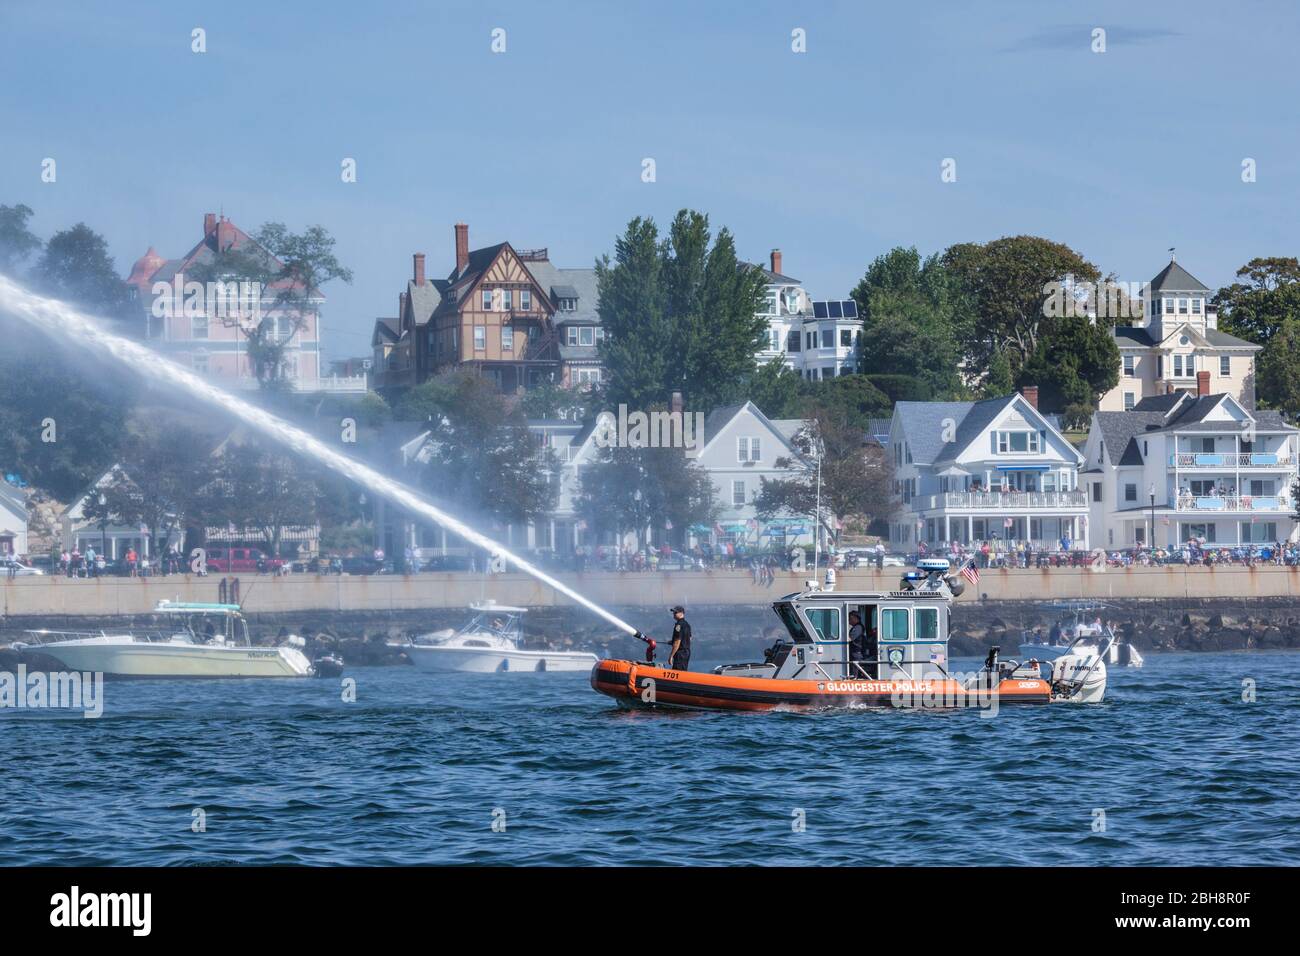 USA, New England, Massachusetts, Cape Ann, Gloucester, Gloucester Schooner Festival, fireboat welcome salute with water cannon Stock Photo